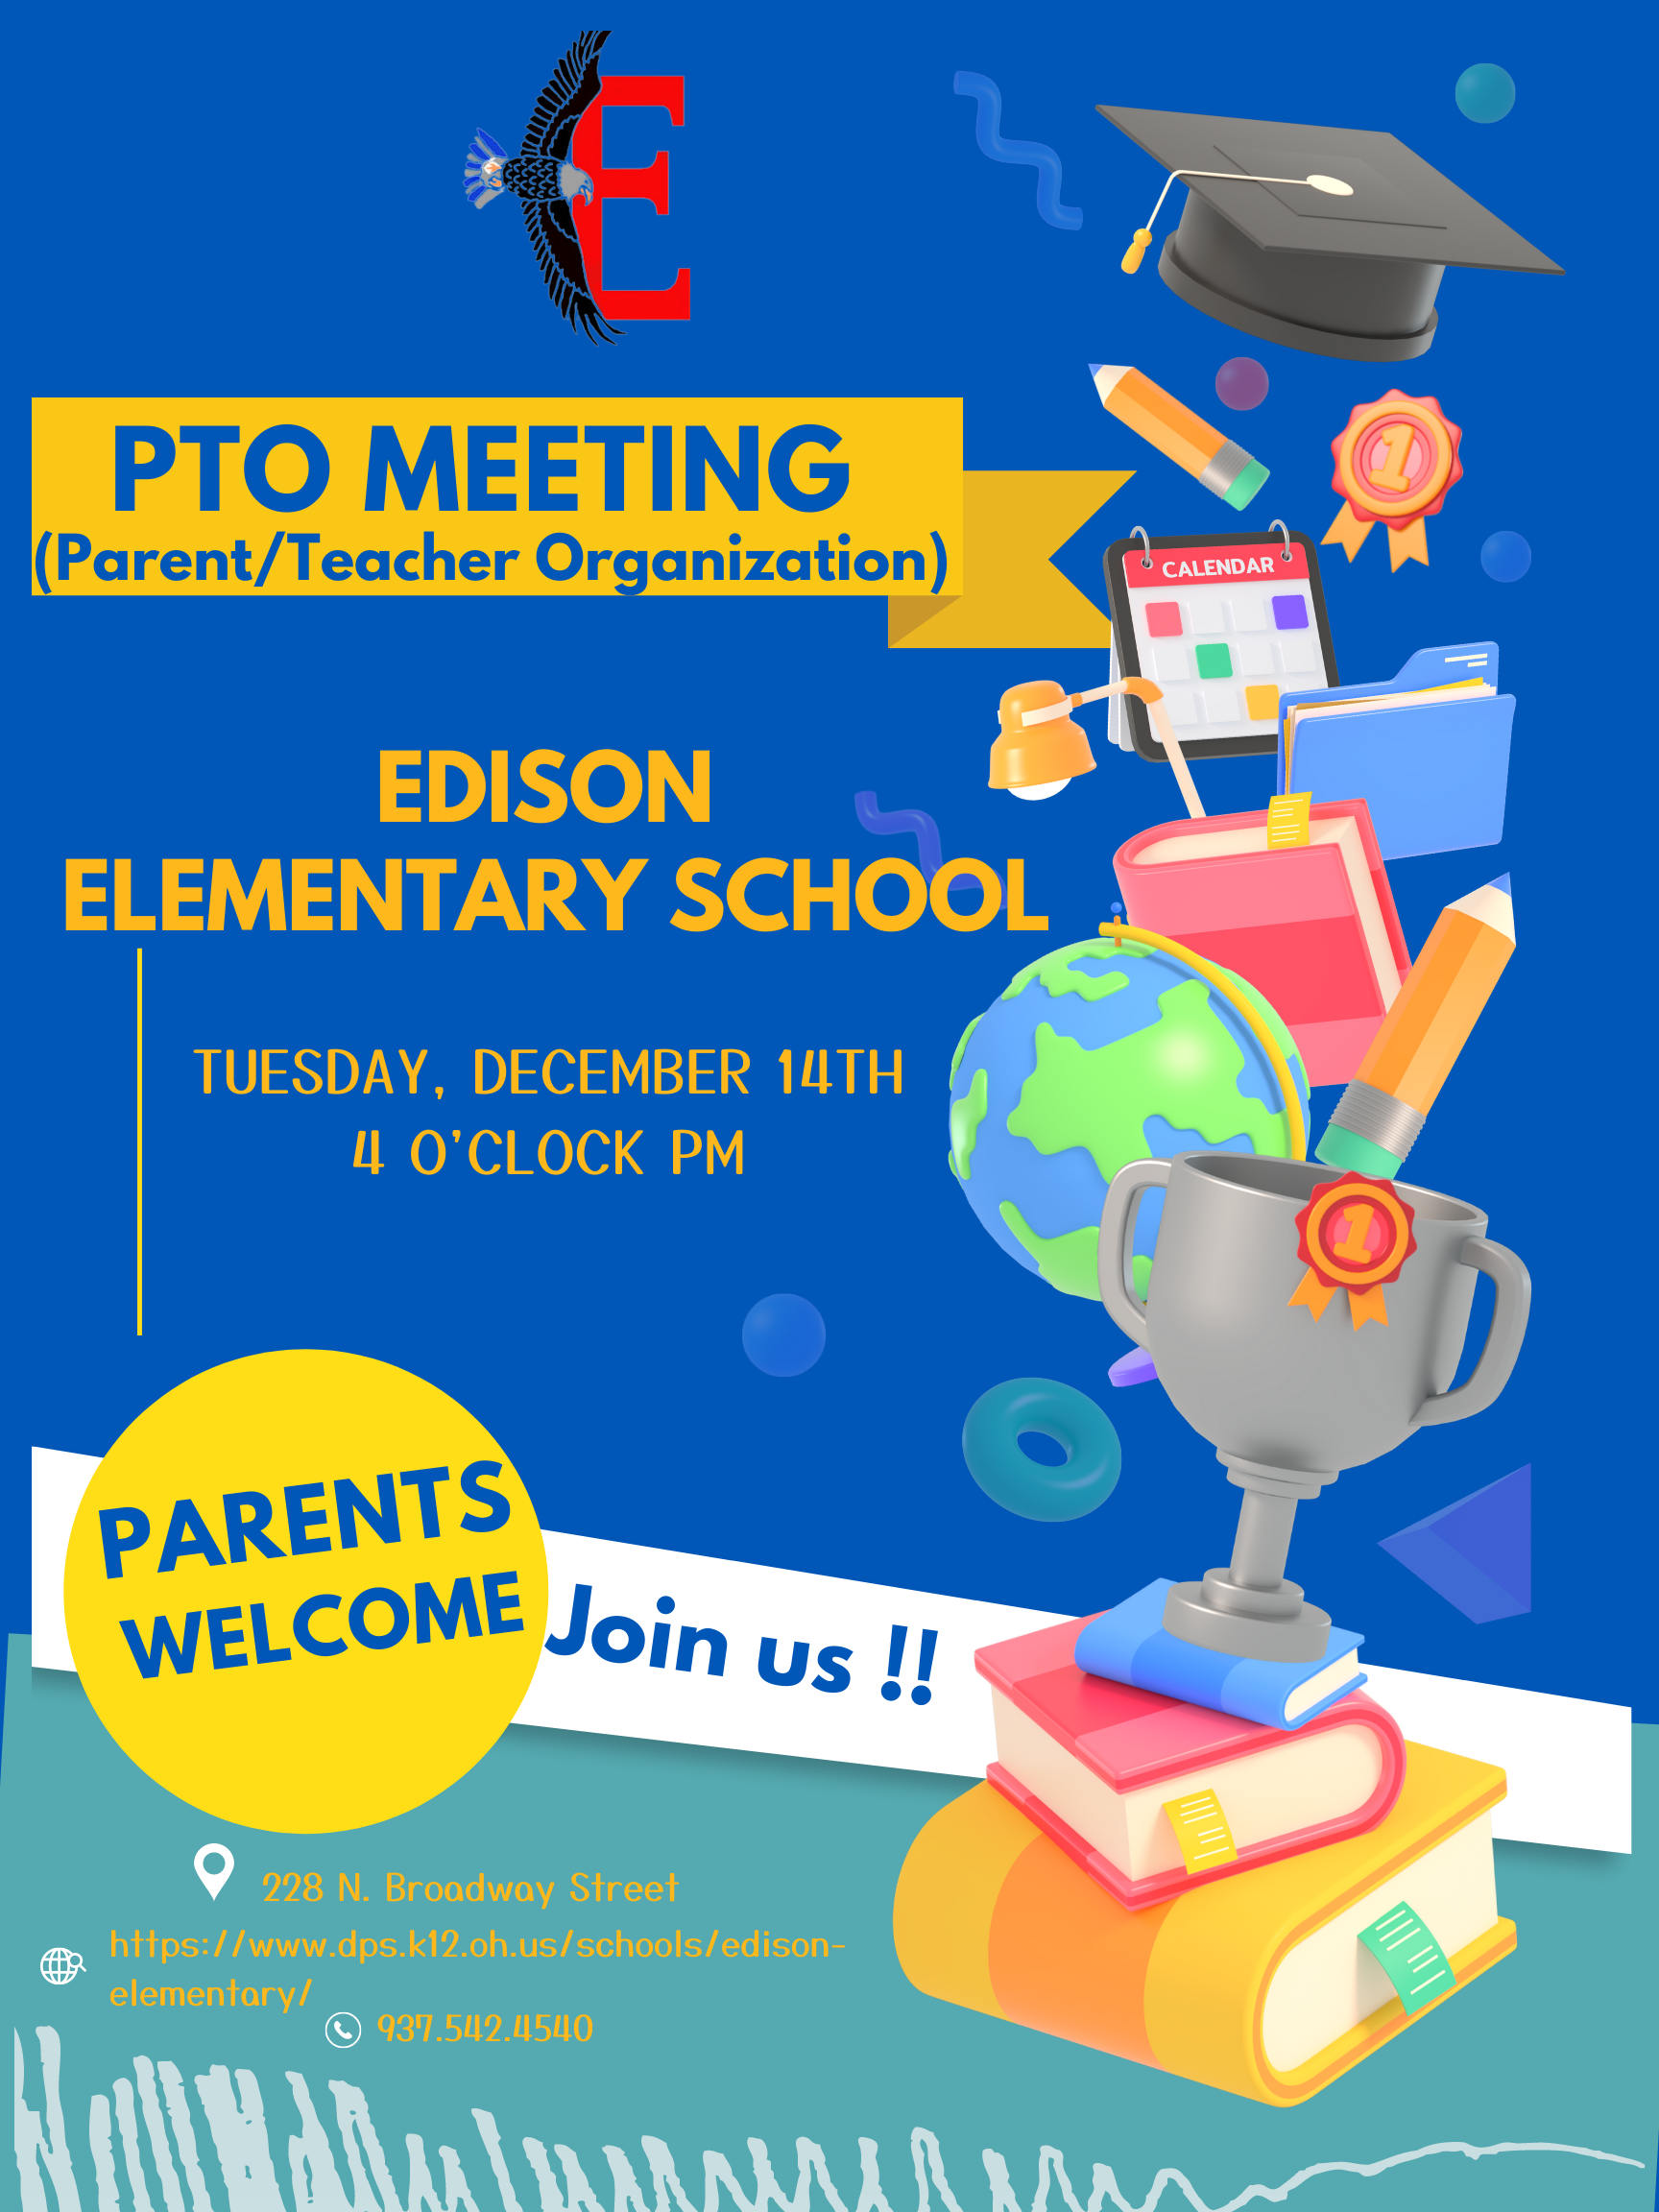 Flyer for Edison Elementary PTO meeting on December 14th at 4 p.m.